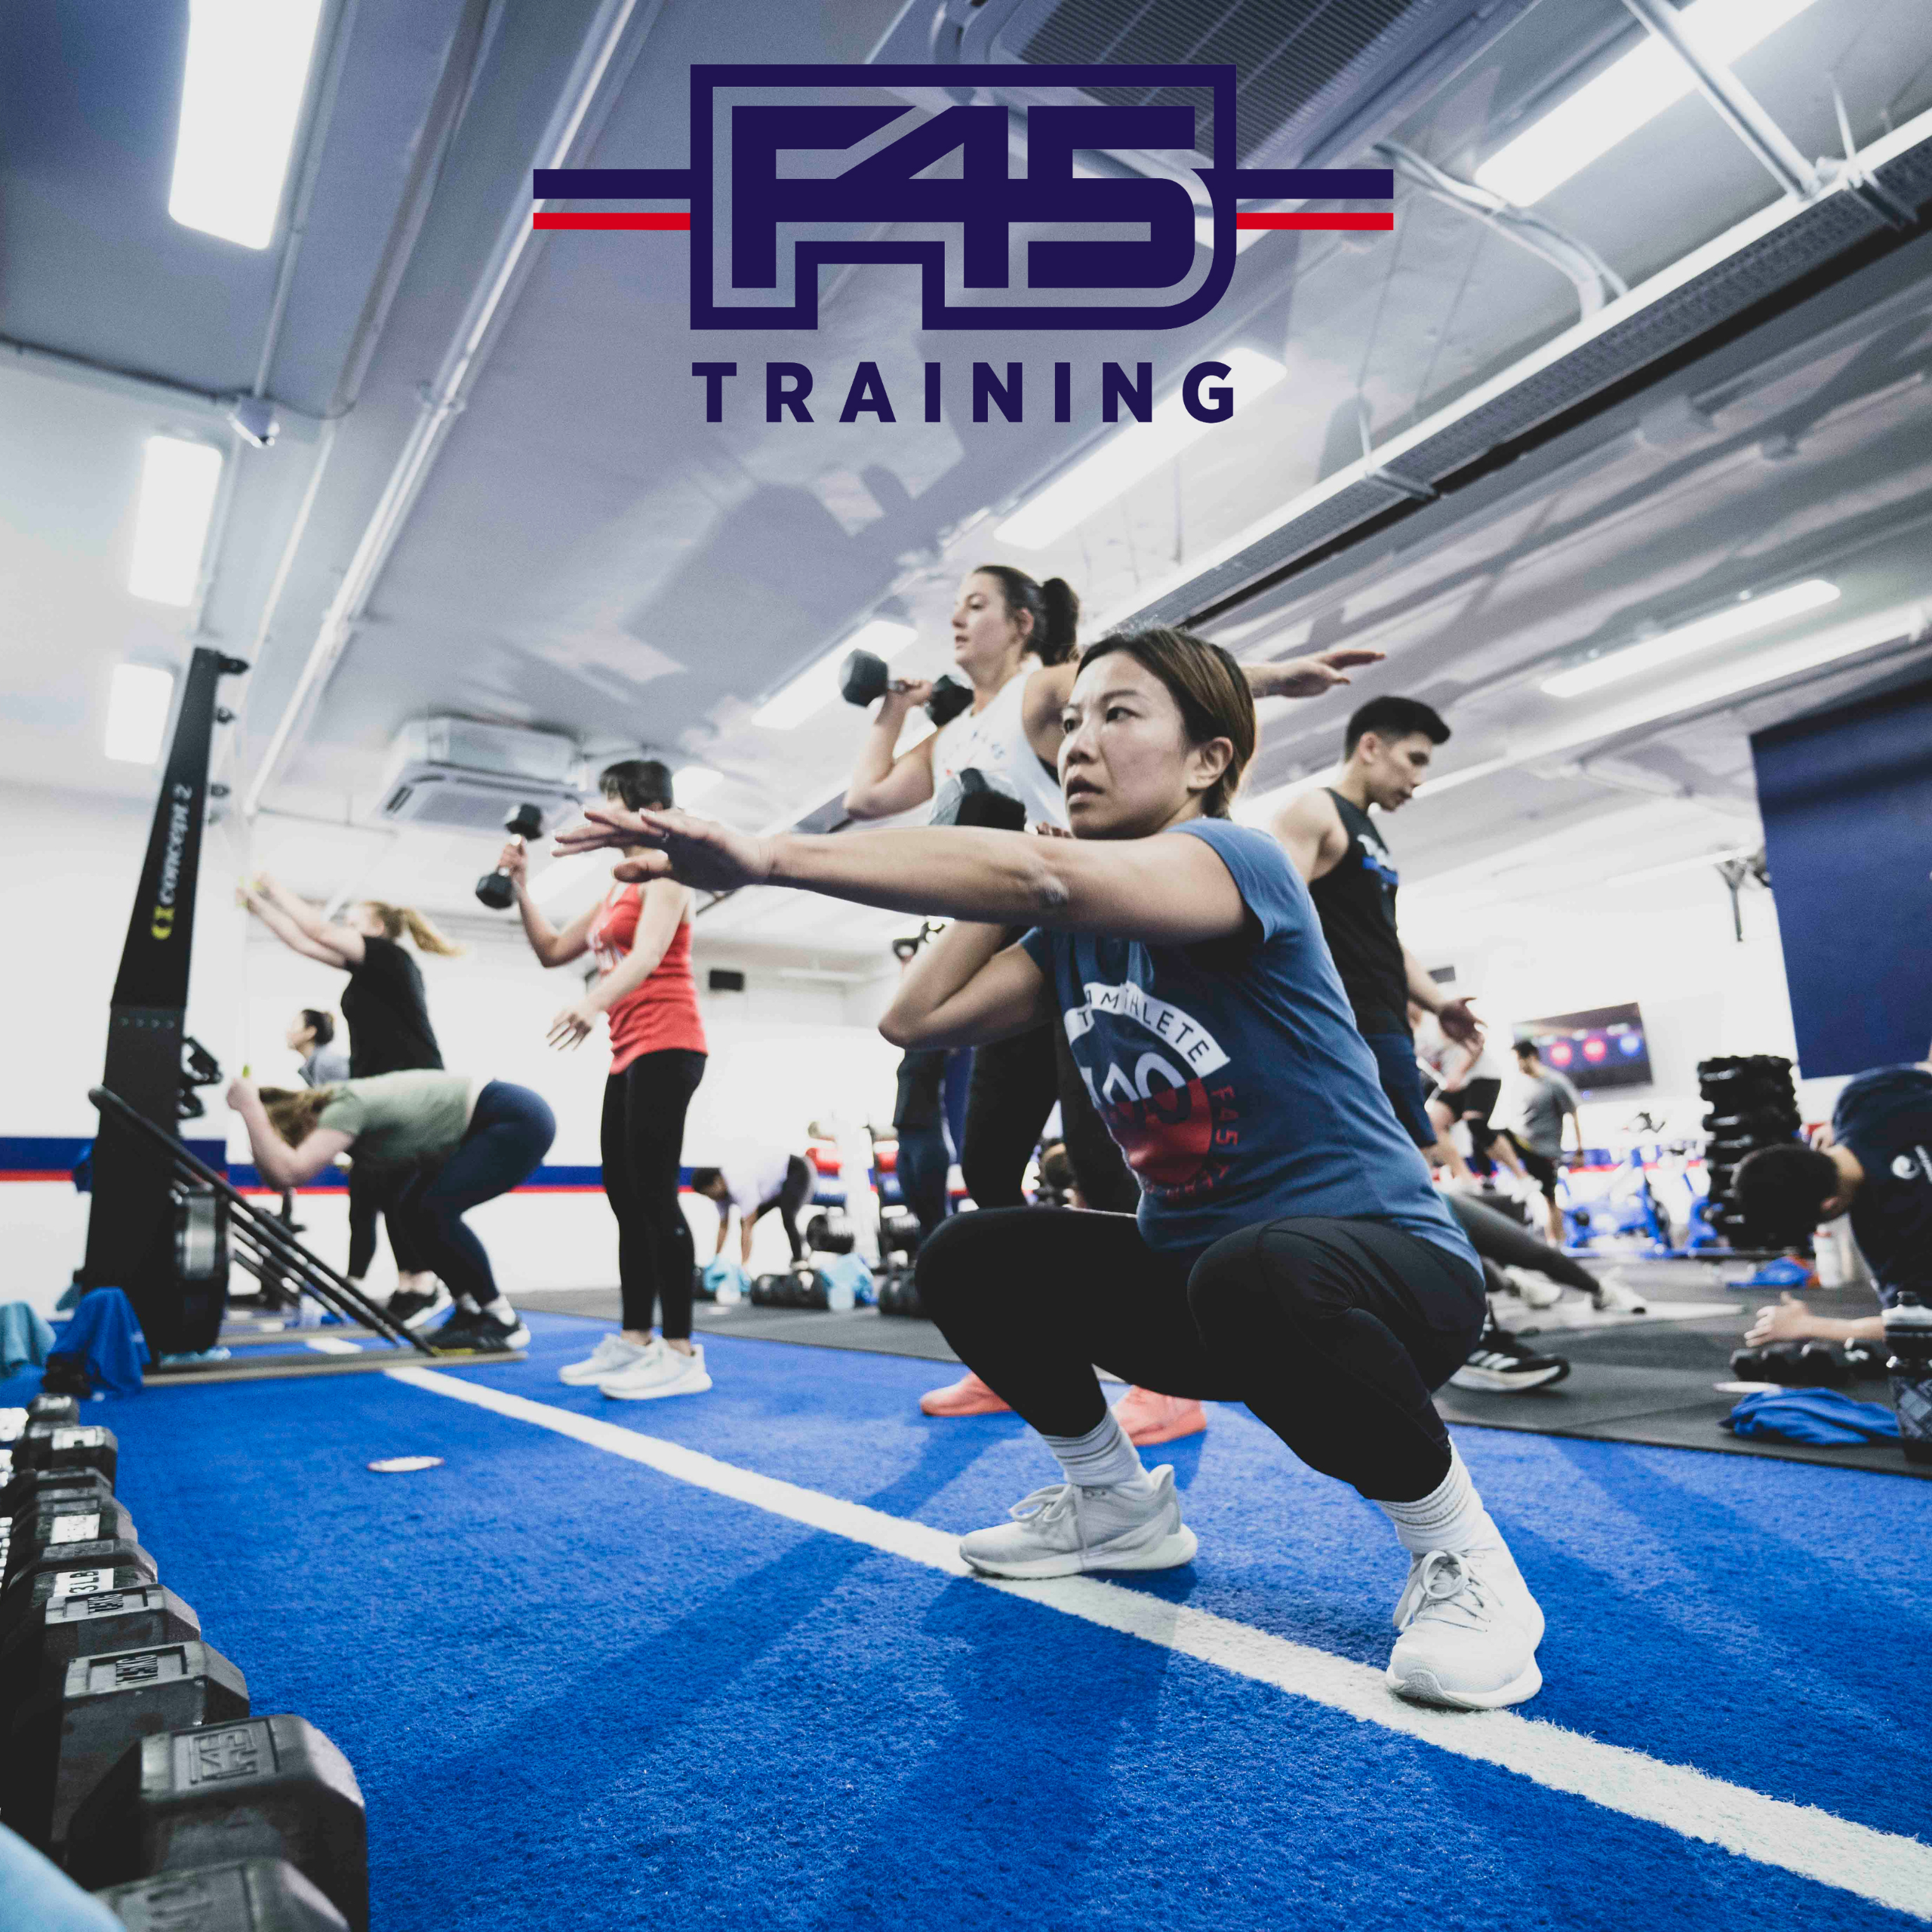 Read more about the article Functional Fitness at F45 Ventura, F45 Camarillo, and F45 Thousand Oaks